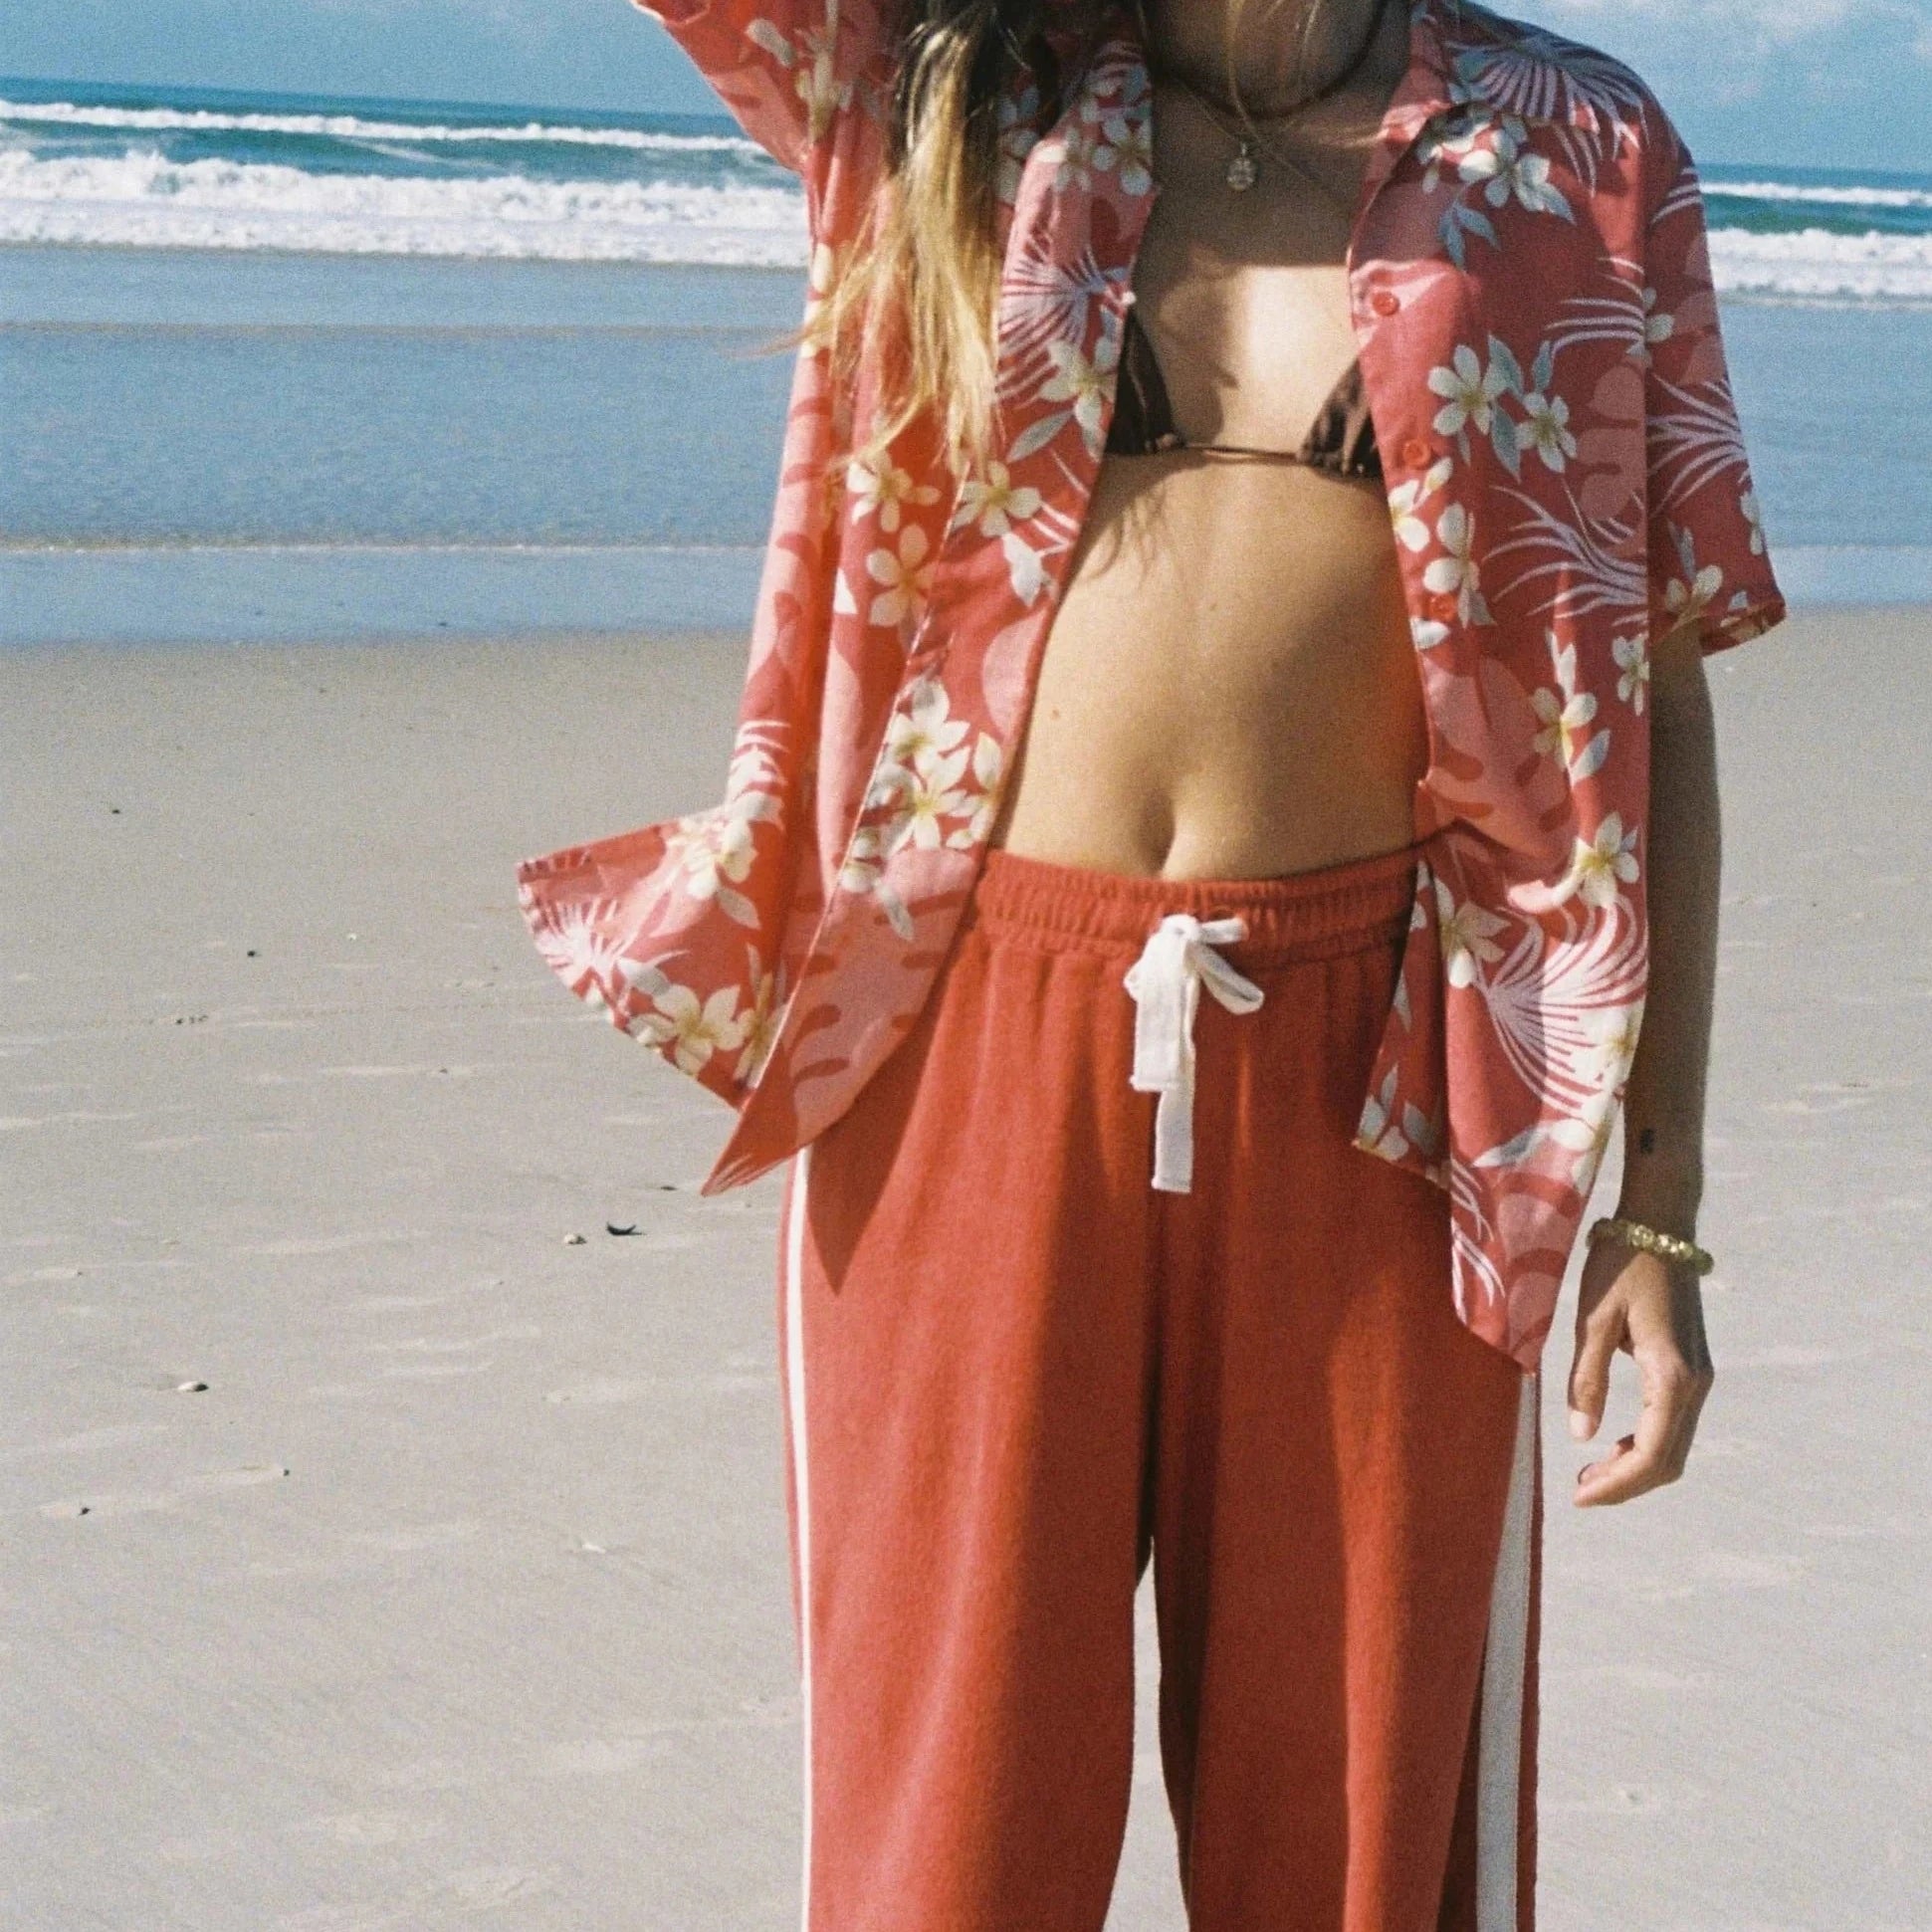 ATMOSEA APRES SURF PANT: RED